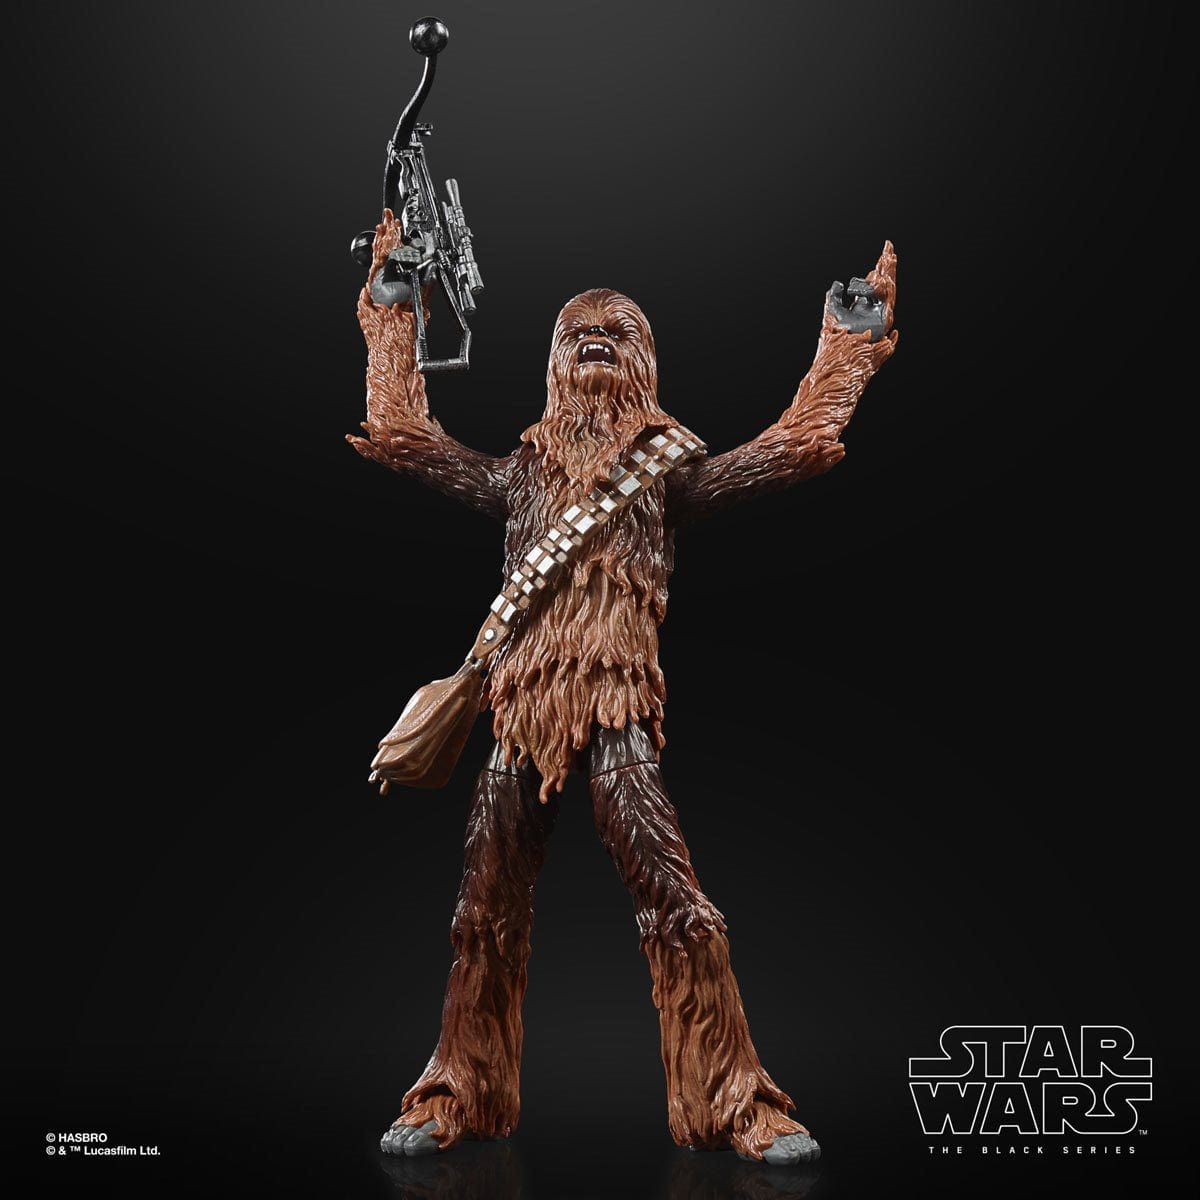 Star Wars The Black Series Archive Chewbacca (The Force Awakens) 6-Inch Action Figure - Pop-O-Loco - Hasbro